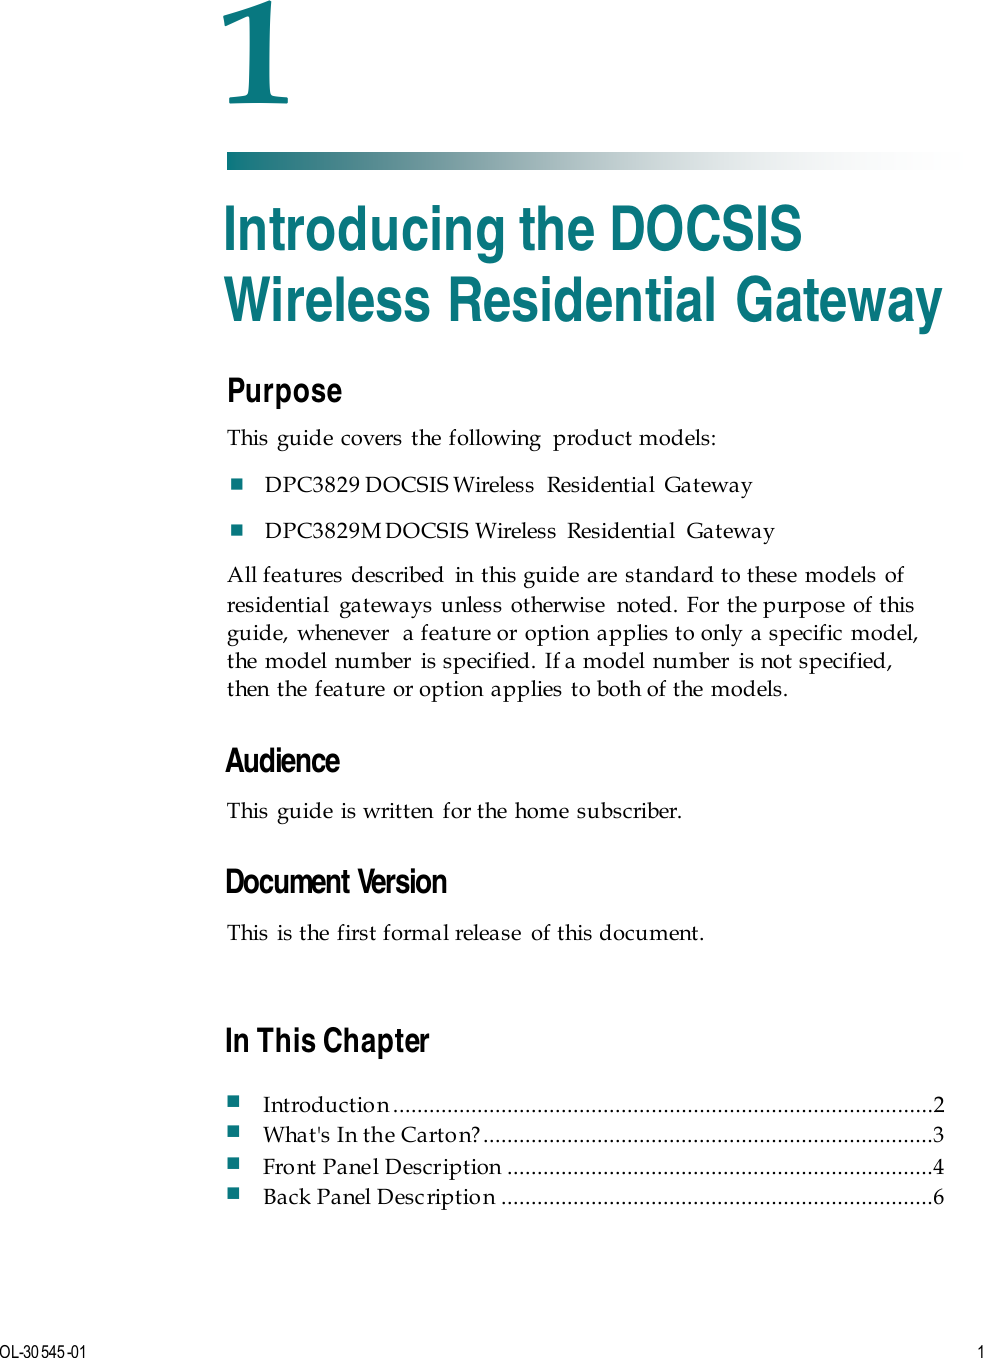   OL-30 545-01   1  Purpose This guide covers the following  product models:  DPC3829 DOCSIS Wireless  Residential  Gateway  DPC3829M DOCSIS Wireless  Residential  Gateway  All features described in this guide are standard to these models of residential gateways unless otherwise  noted. For the purpose of this guide, whenever  a feature or option applies to only a specific model, the model number  is specified. If a model number  is not specified, then the feature or option applies to both of the models.   Audience This guide is written for the home subscriber.    Document Version This is the first formal release  of this document.     1 Chapter 1 Introducing the DOCSIS Wireless Residential Gateway In This Chapter  Introduction ..........................................................................................2  What&apos;s In the Carto n? ...........................................................................3  Front Panel Description .......................................................................4  Back Panel Desc ription ........................................................................6 